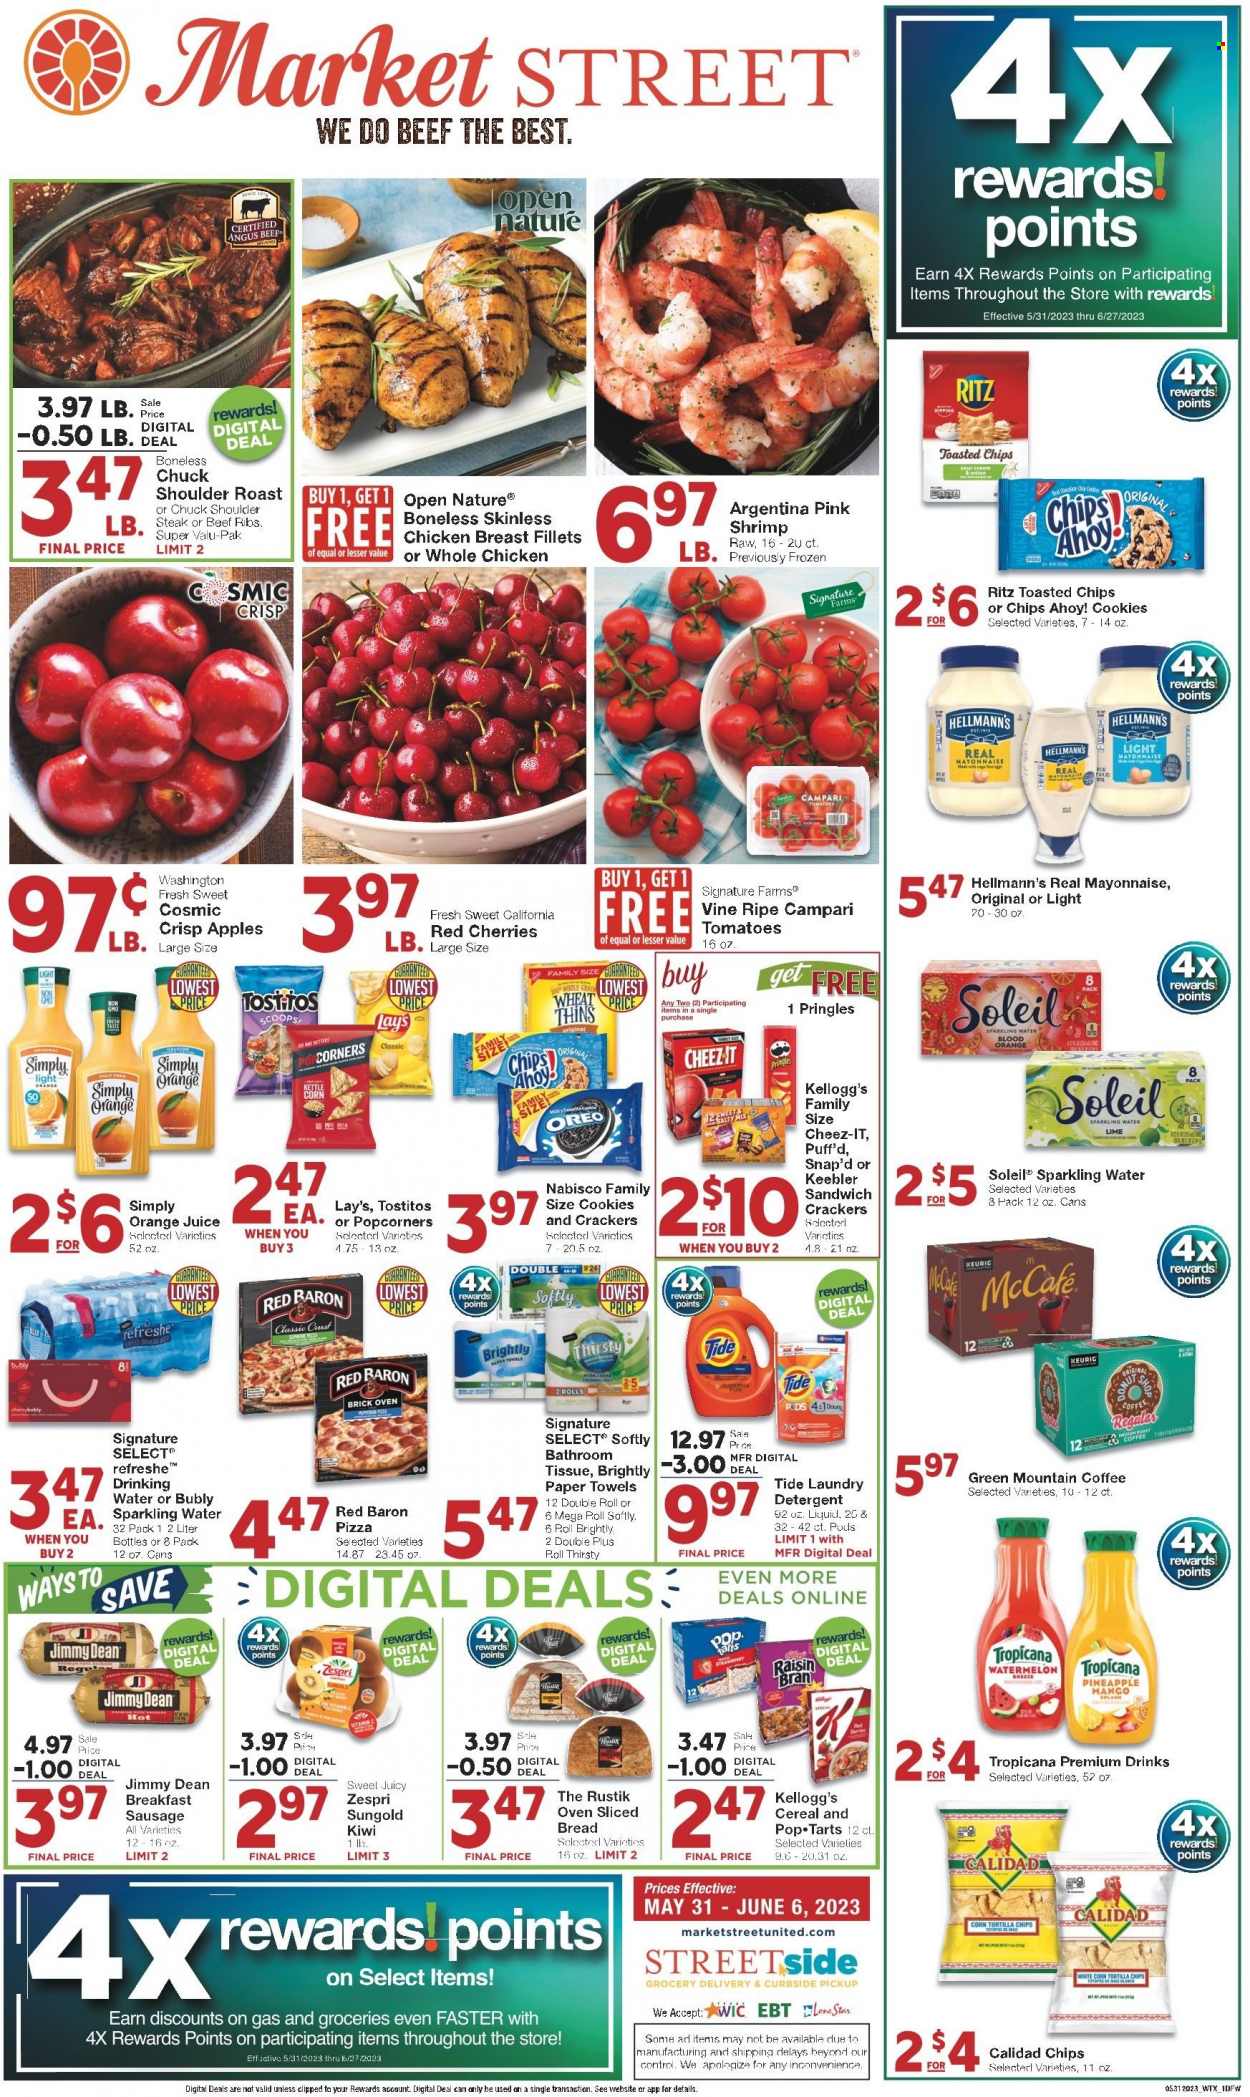 thumbnail - Market Street Flyer - 05/31/2023 - 06/06/2023 - Sales products - bread, apples, watermelon, pineapple, cherries, shrimps, pizza, Jimmy Dean, roast, sausage, Oreo, cage free eggs, Nature Fresh, Hellmann’s, Red Baron, cookies, chocolate chips, crackers, Kellogg's, Pop-Tarts, Chips Ahoy!, Keebler, RITZ, Nabisco, tortilla chips, kettle corn, Pringles, Lay’s, Thins, popcorn, Cheez-It, Tostitos, salty snack, cereals, orange juice, juice, sparkling water, water, coffee, McCafe, Keurig, Green Mountain, whole chicken, chicken breasts, chicken, beef meat, beef ribs, steak, ribs, tissues, kitchen towels, paper towels, detergent, Tide, laundry detergent. Page 1.